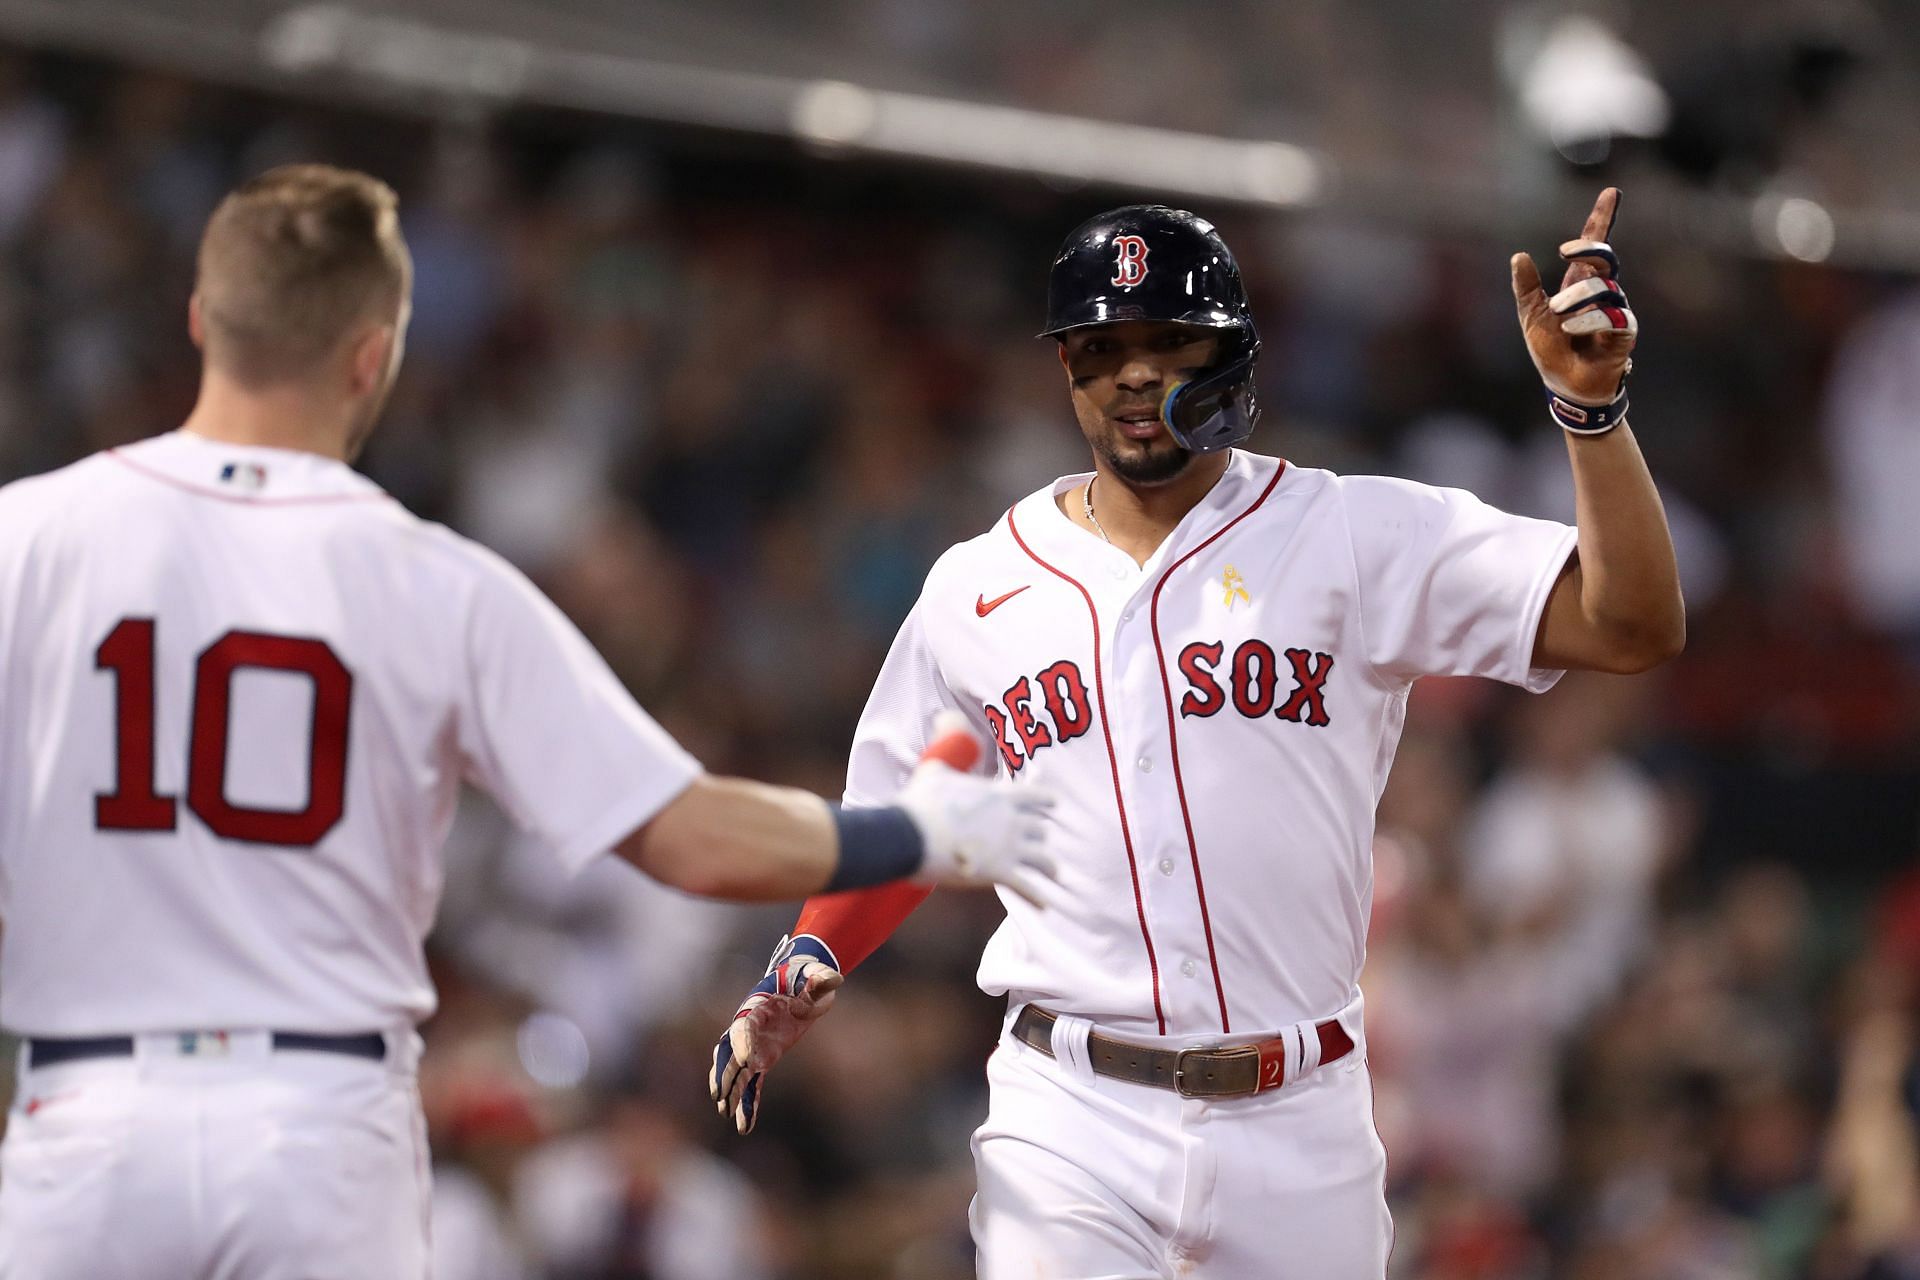 Xander Bogaerts Contract: Breaking down the Padres' star's long-term  contract